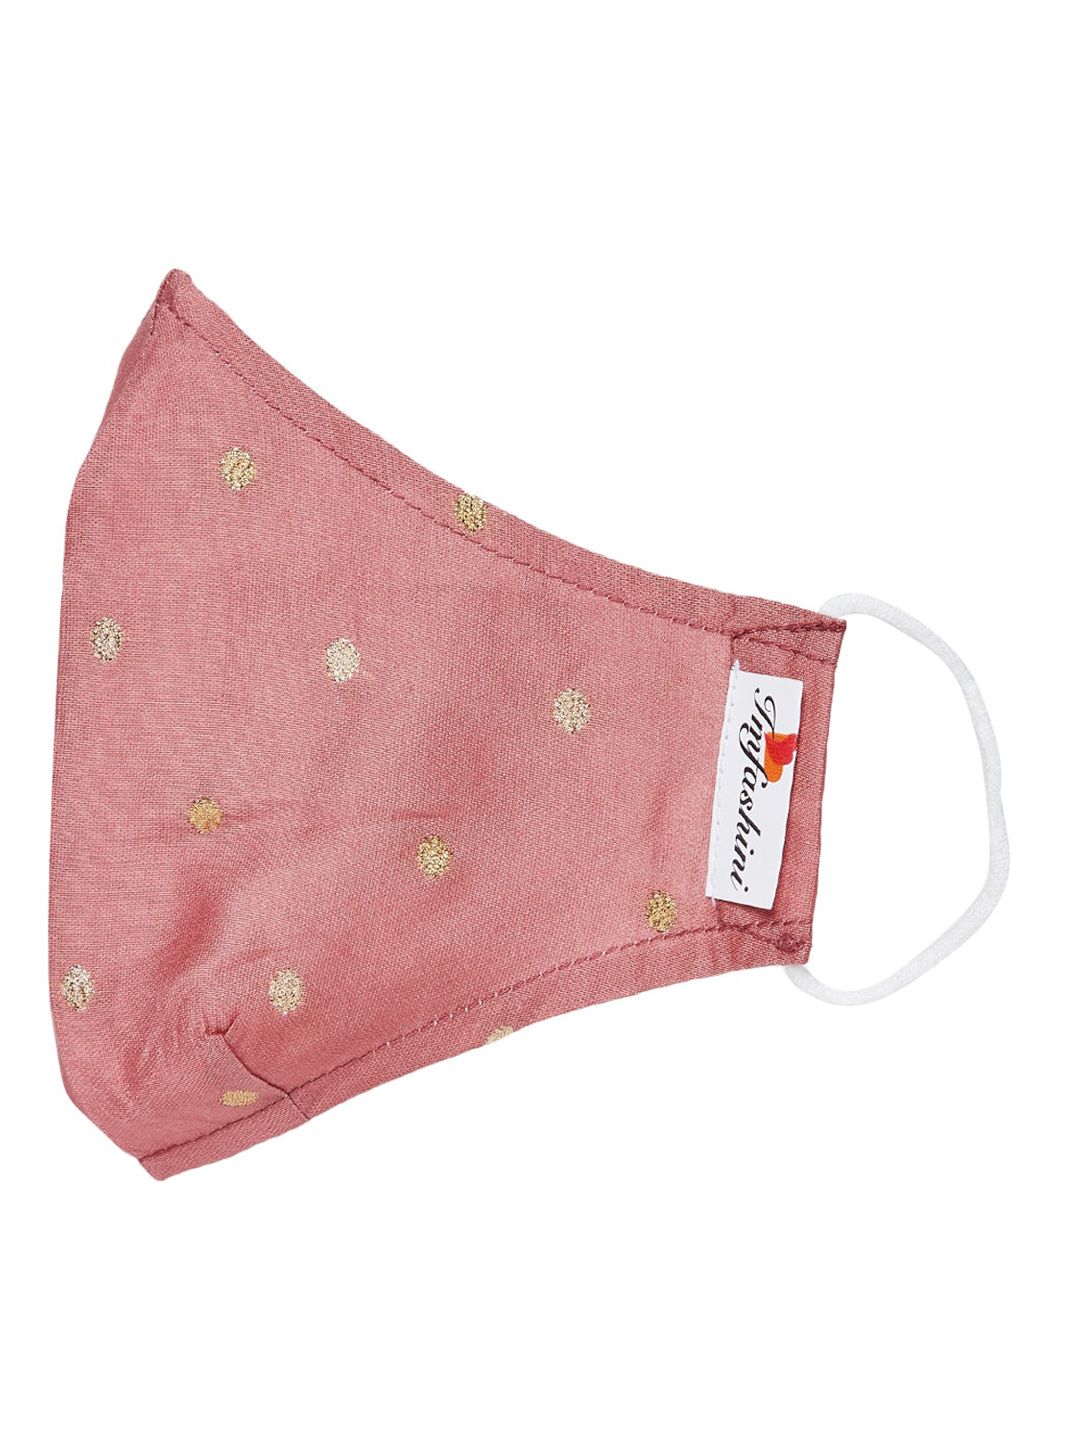 Imfashini Women Pink & Gold-Coloured Embroidered 2-Ply Reusable Cloth Mask Price in India